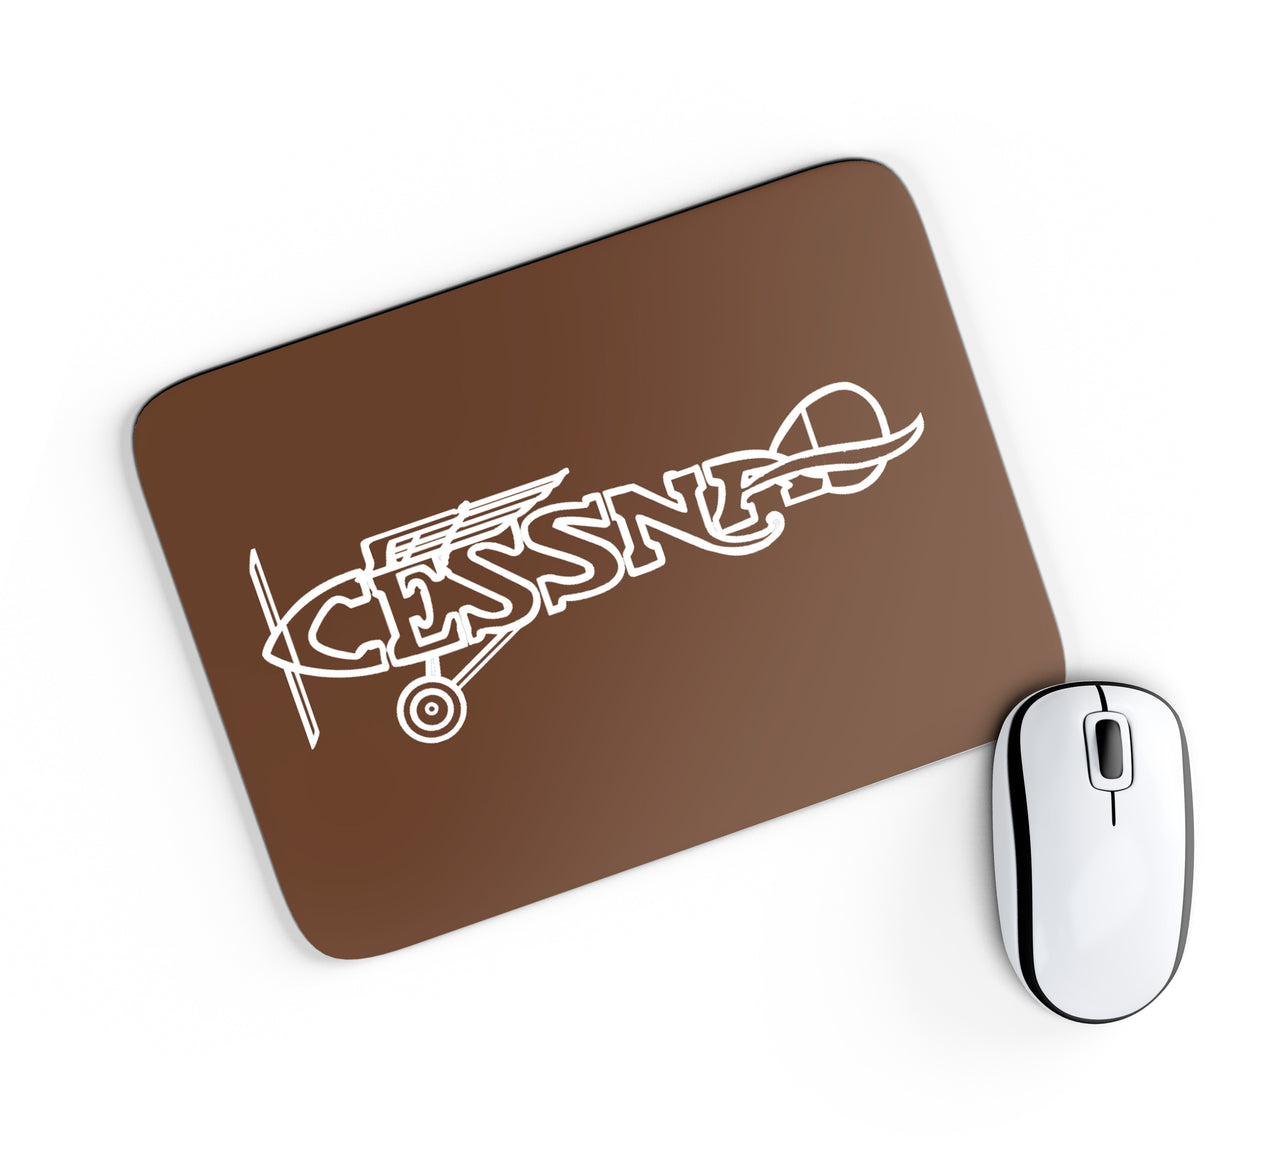 Special Cessna Text Designed Mouse Pads